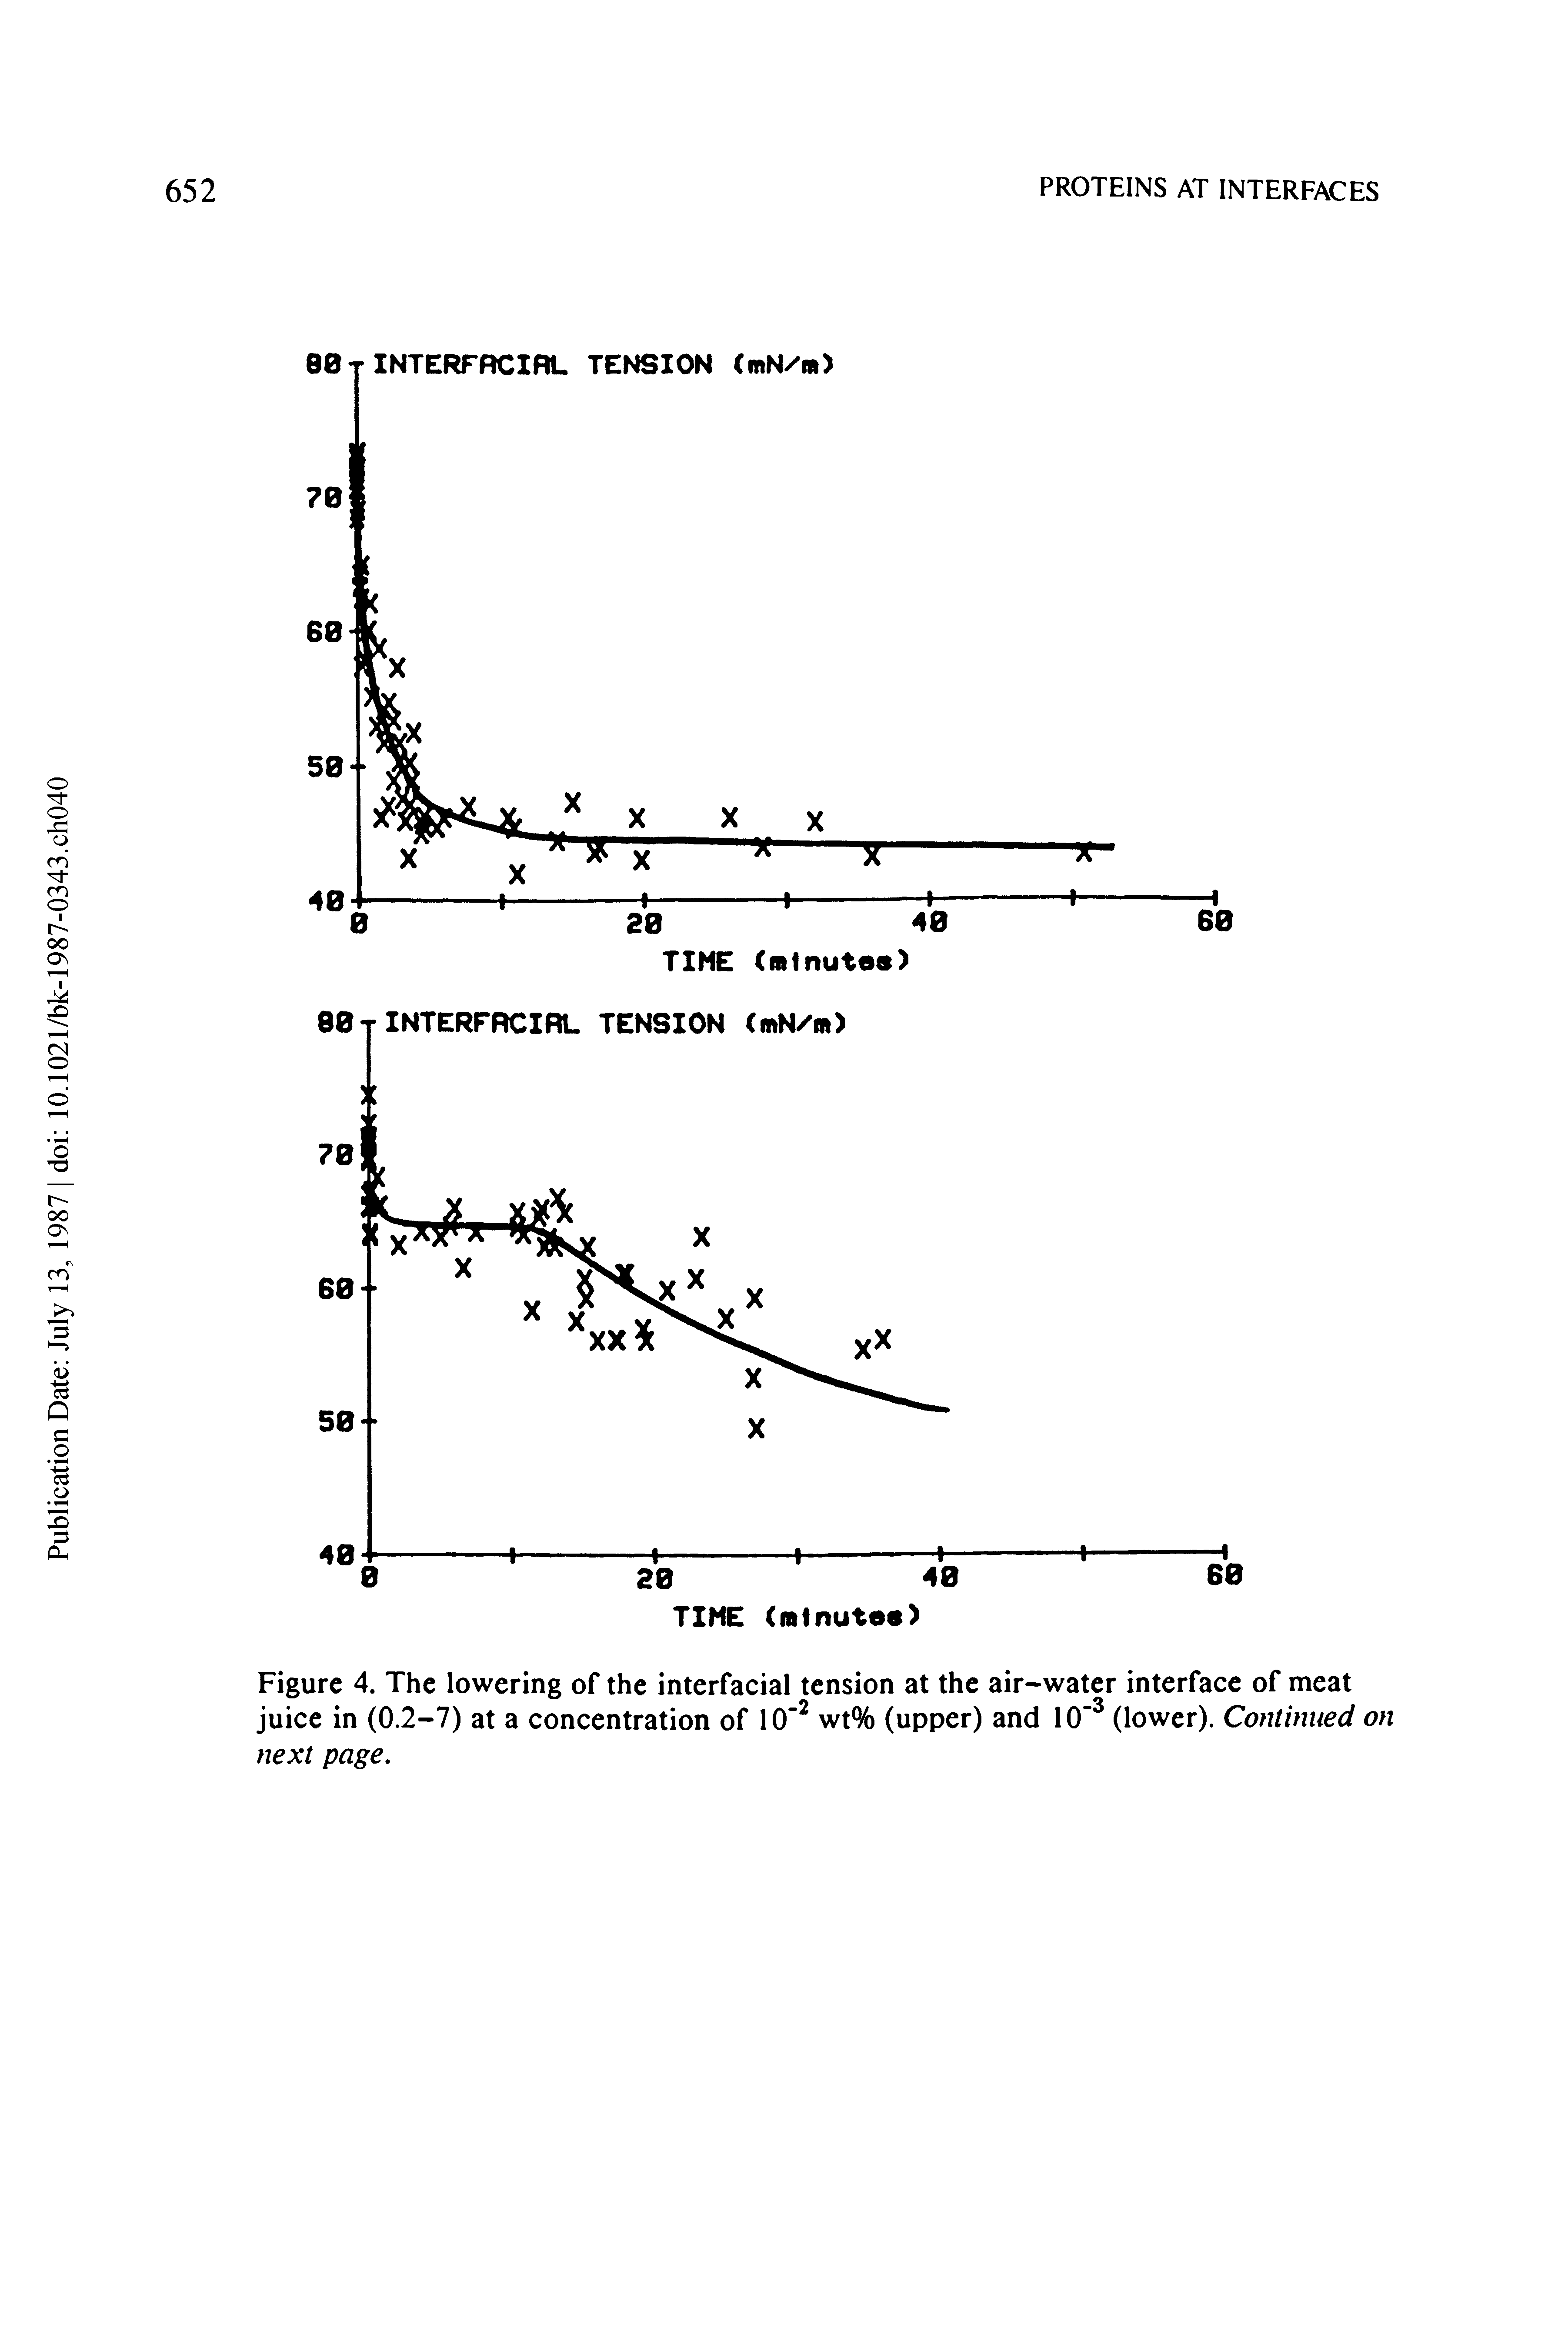 Figure 4. The lowering of the interfacial tension at the air-water interface of meat juice in (0.2-7) at a concentration of 10" wt% (upper) and 10" (lower). Continued on next page.